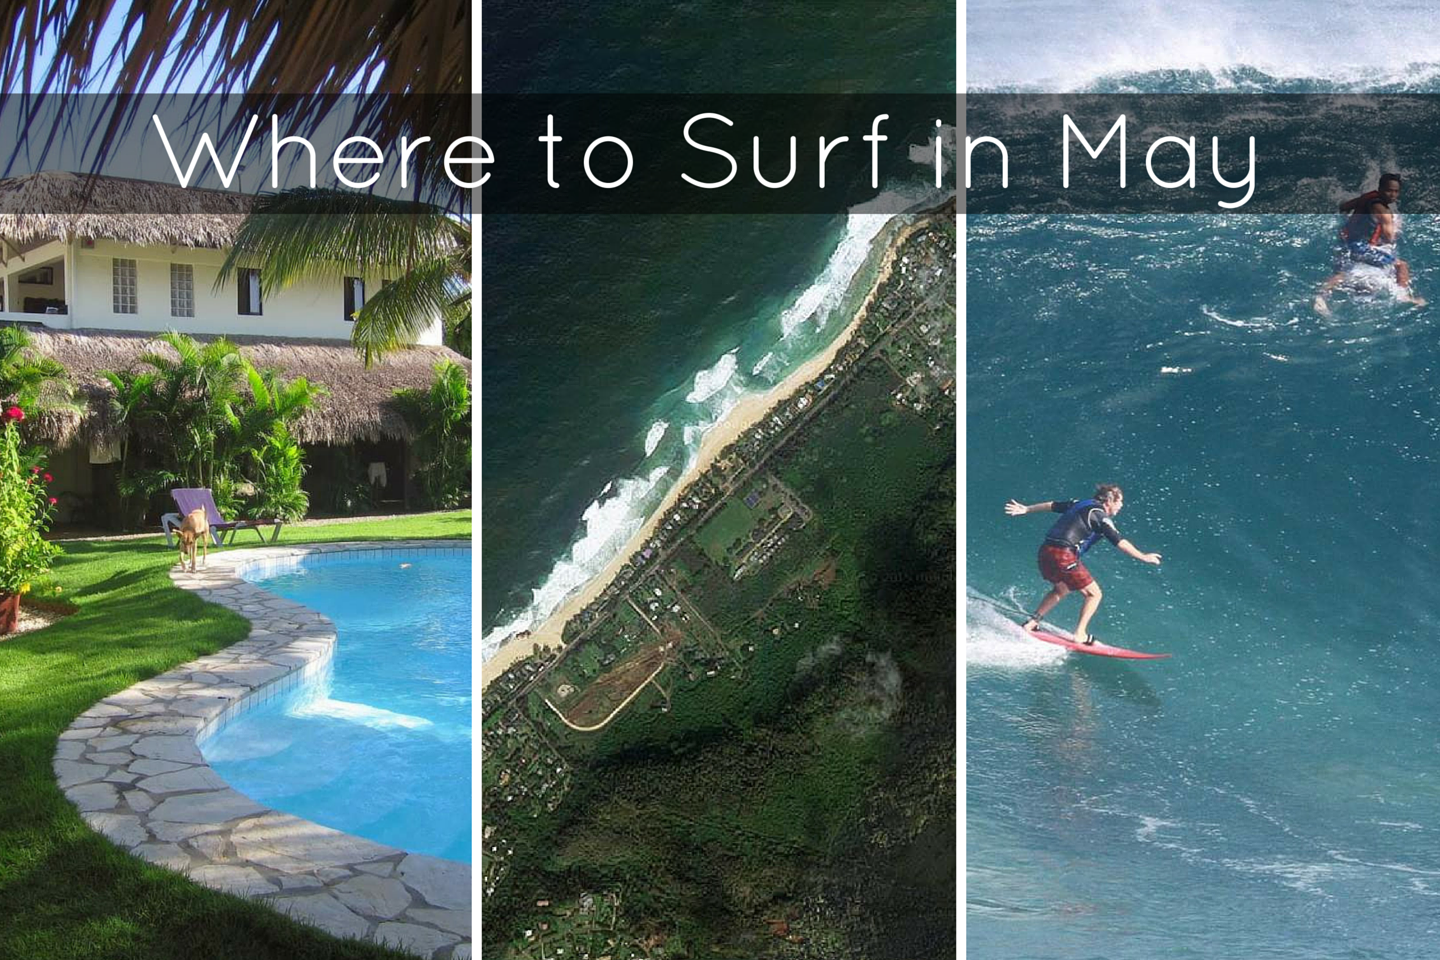 Where to Surf in May